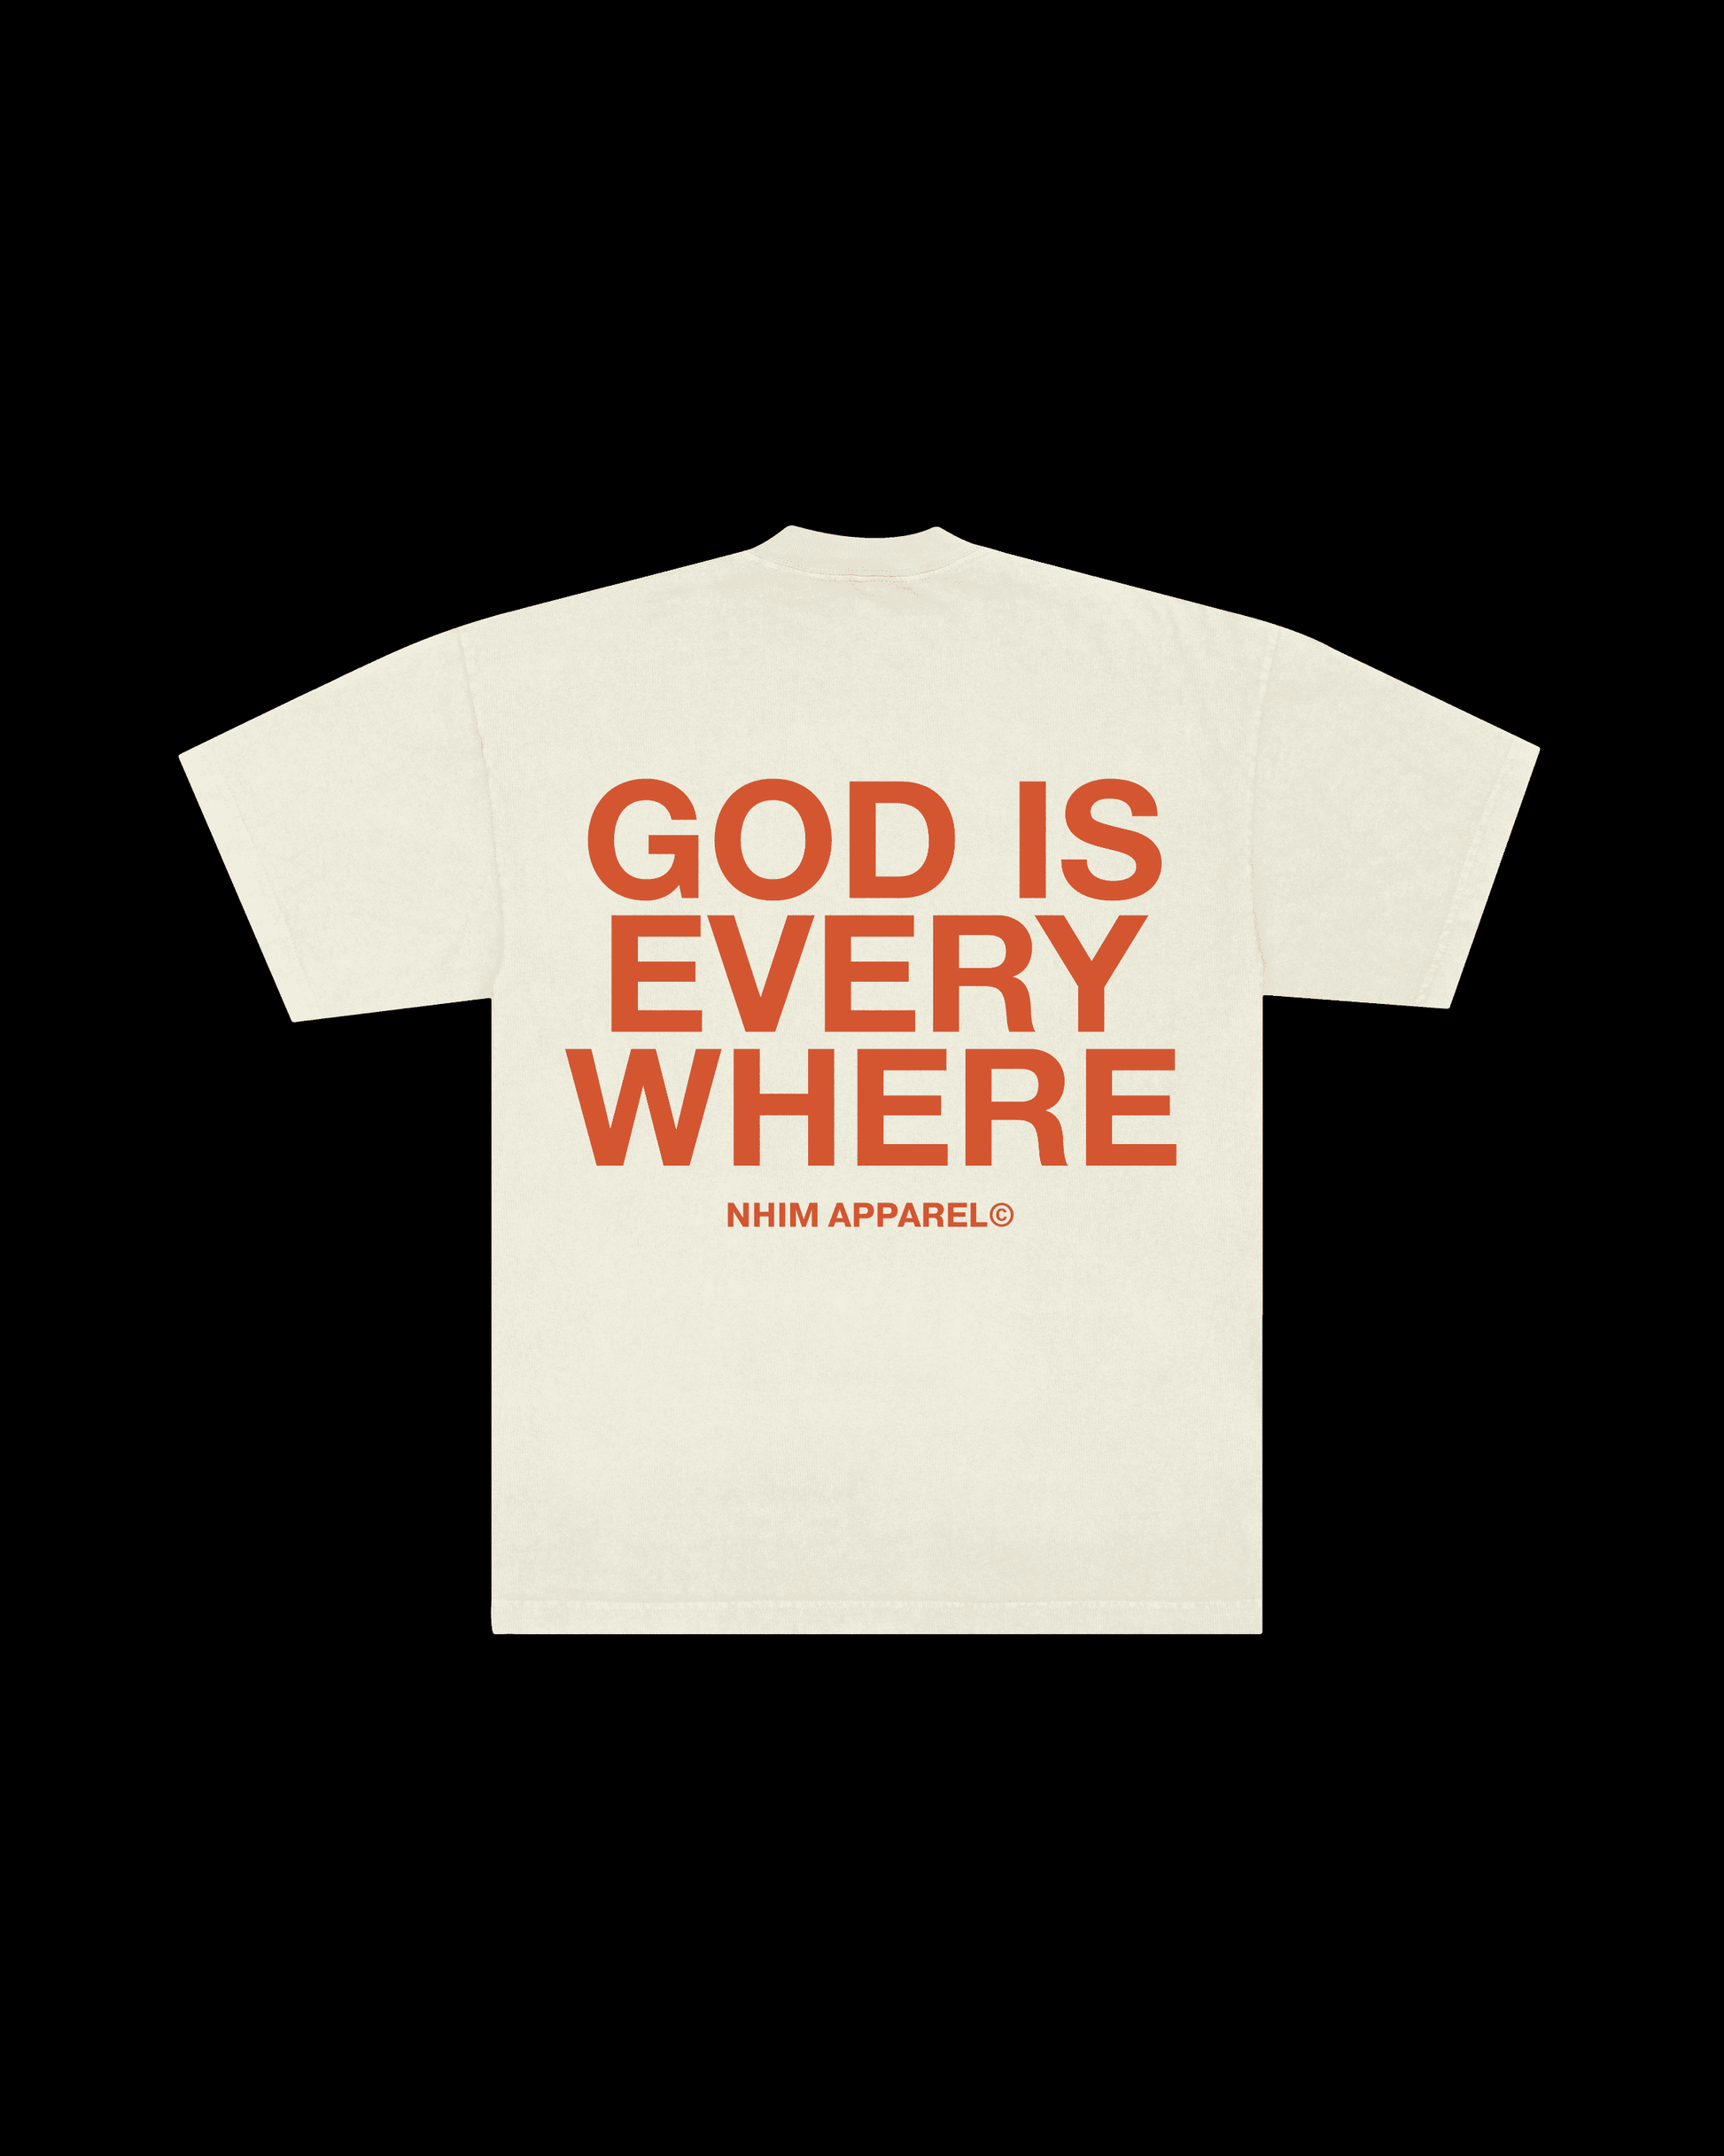 God Is Everywhere off white & orange colored premium christian t shirt by NHIM Apparel christian clothing brand